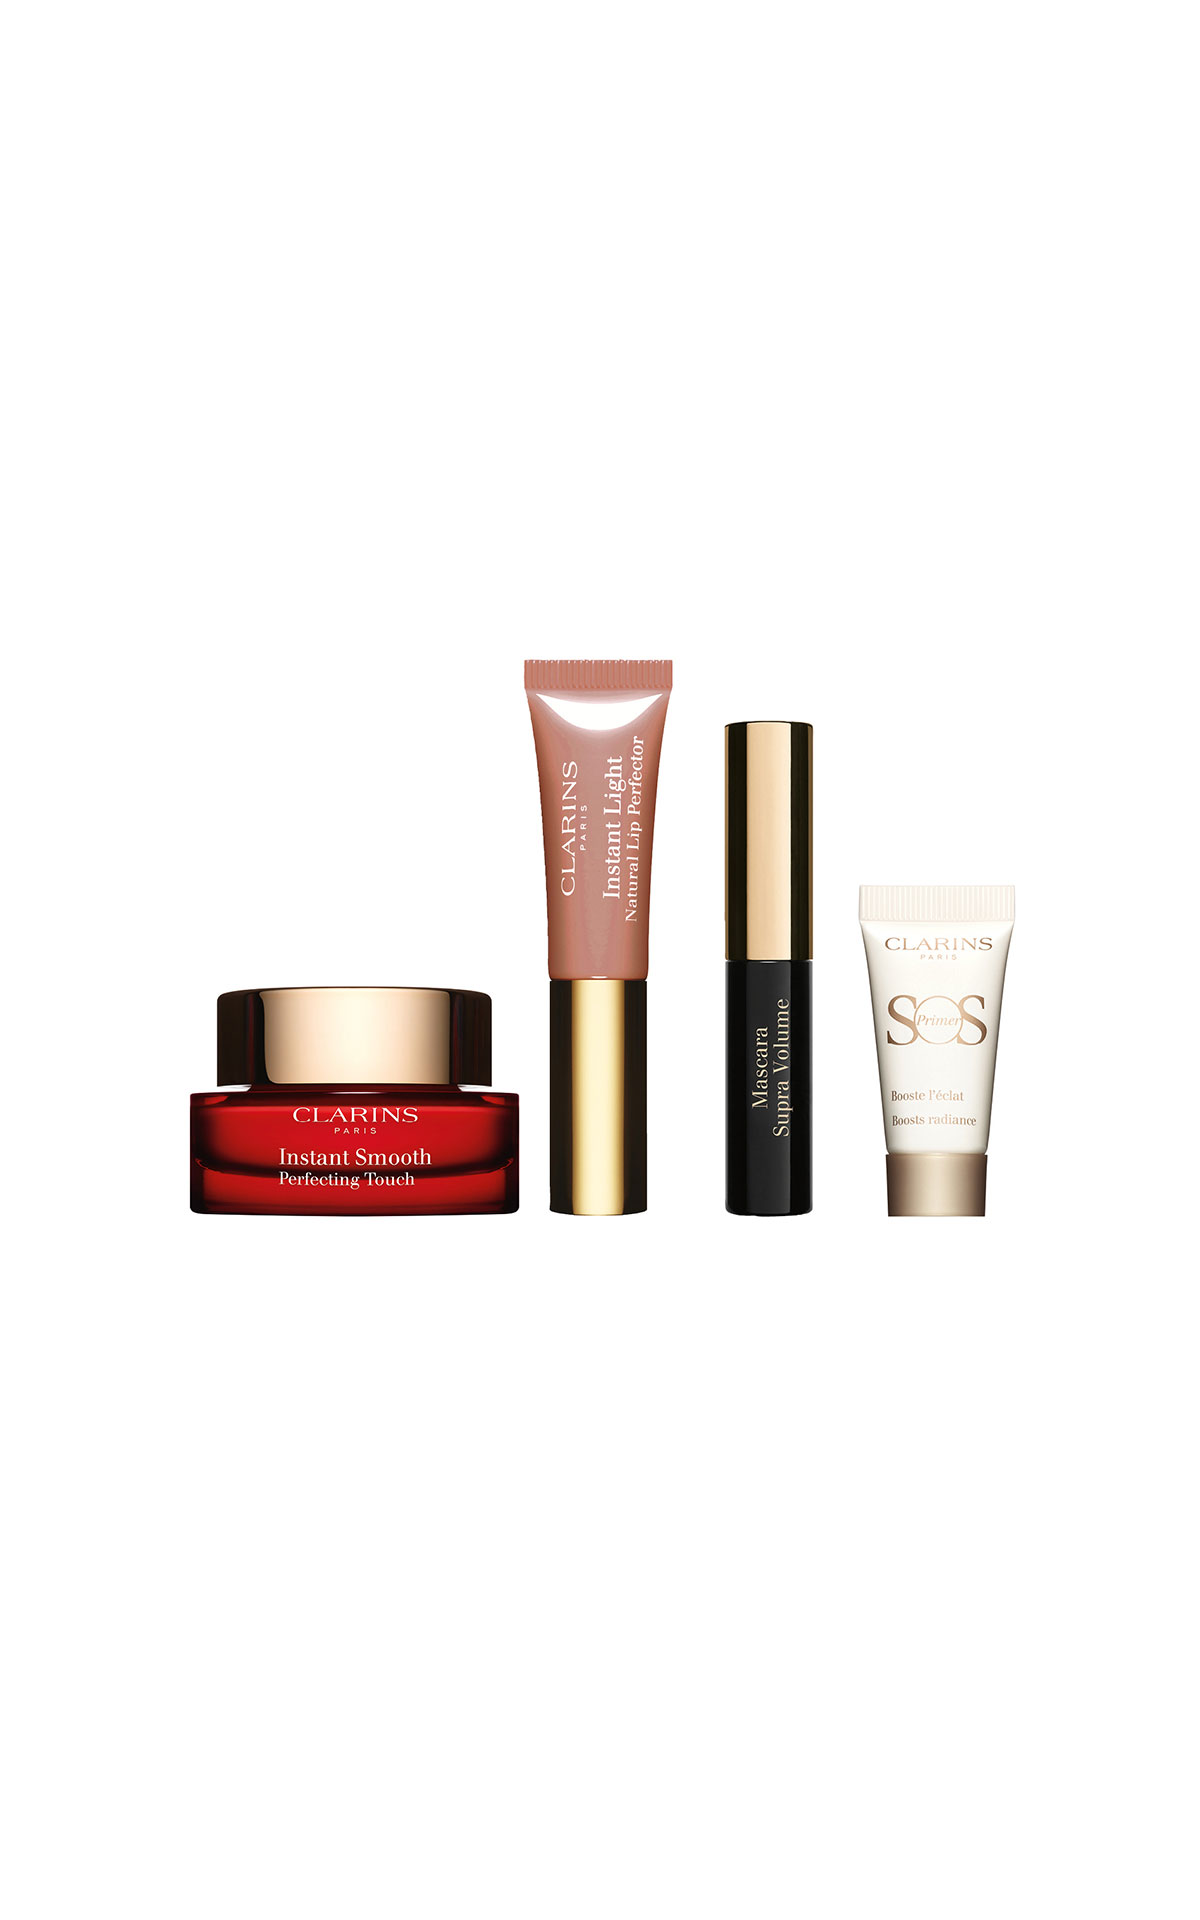 Clarins Make-up heroes from Bicester Village